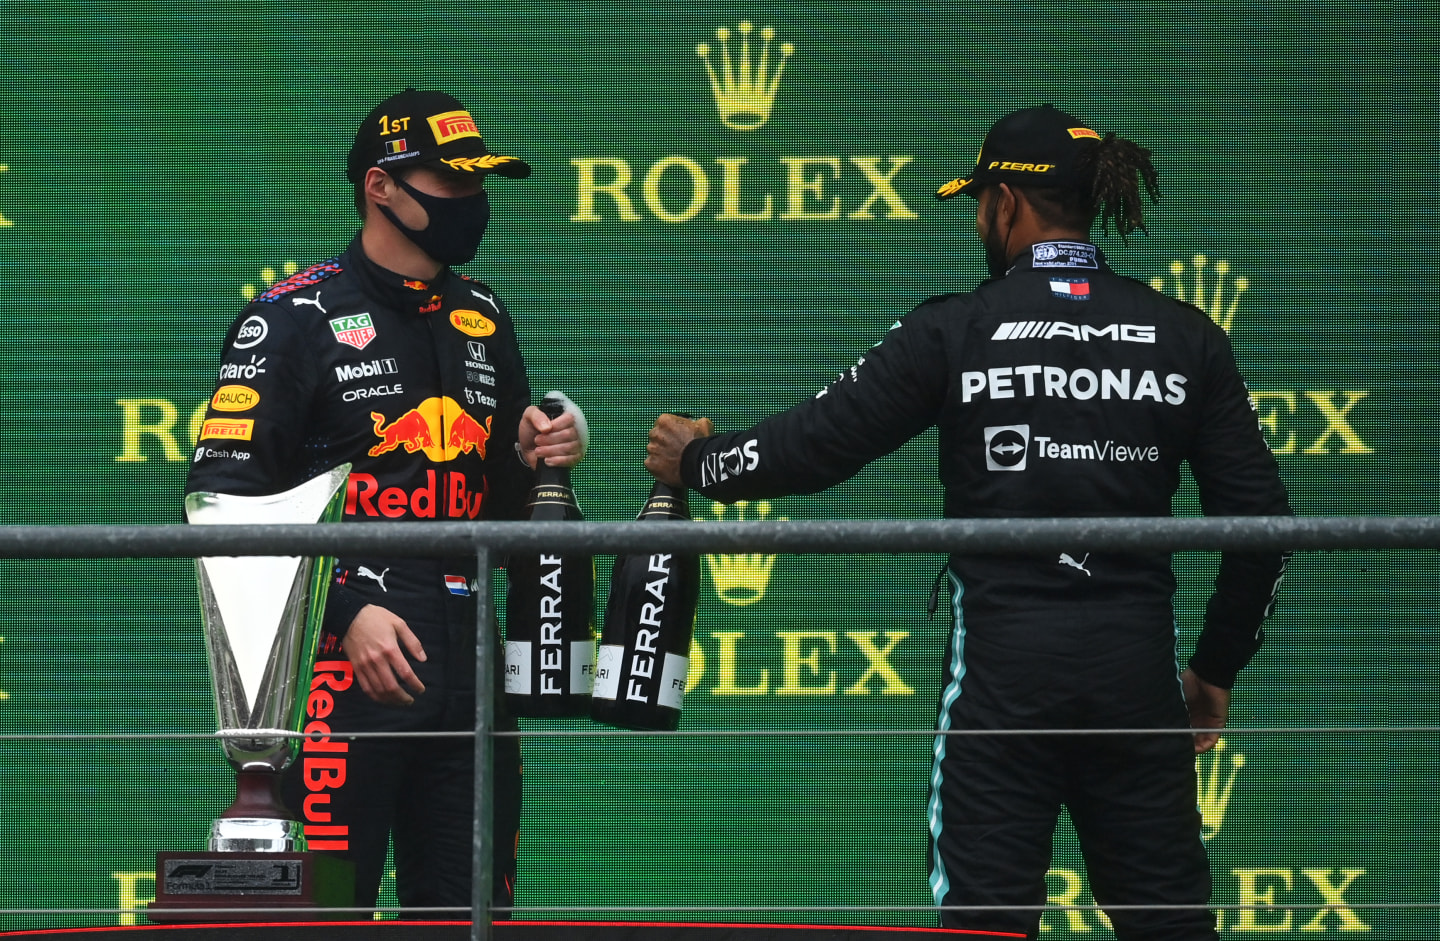 SPA, BELGIUM - AUGUST 29: Race winner Max Verstappen of Netherlands and Red Bull Racing and third placed Lewis Hamilton of Great Britain and Mercedes GP celebrate on the podium during the F1 Grand Prix of Belgium at Circuit de Spa-Francorchamps on August 29, 2021 in Spa, Belgium. (Photo by Dan Mullan/Getty Images)